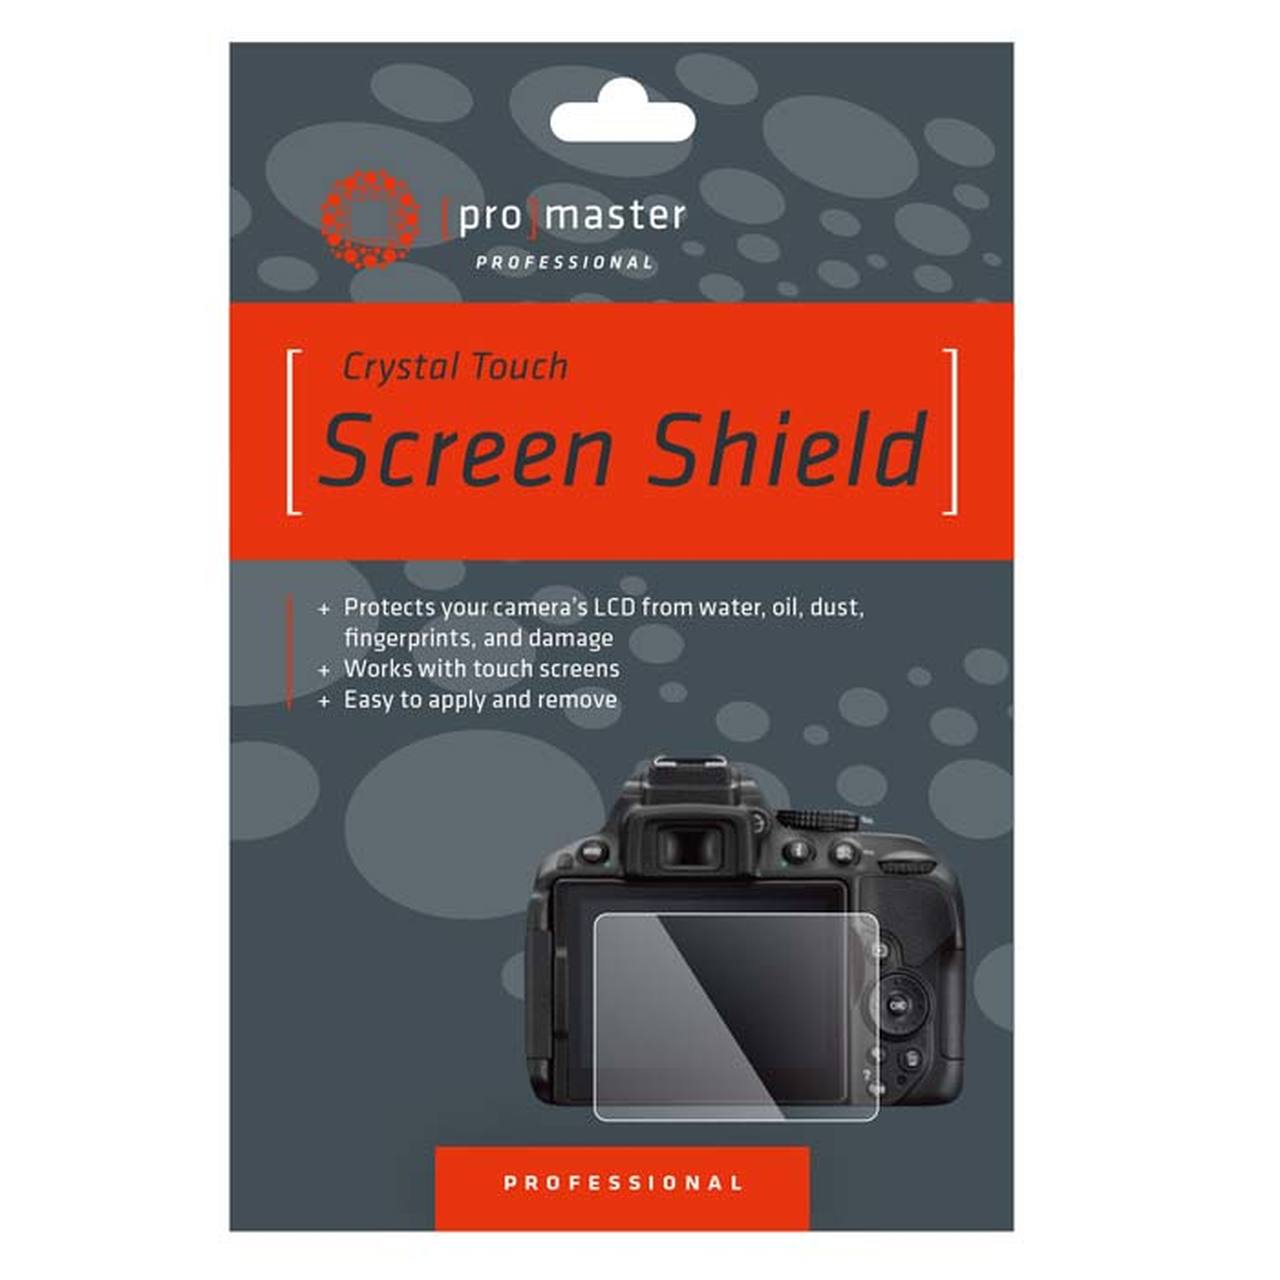 Promaster 1140 Crystal Touch Screen Shield for Canon T7, T6, T5